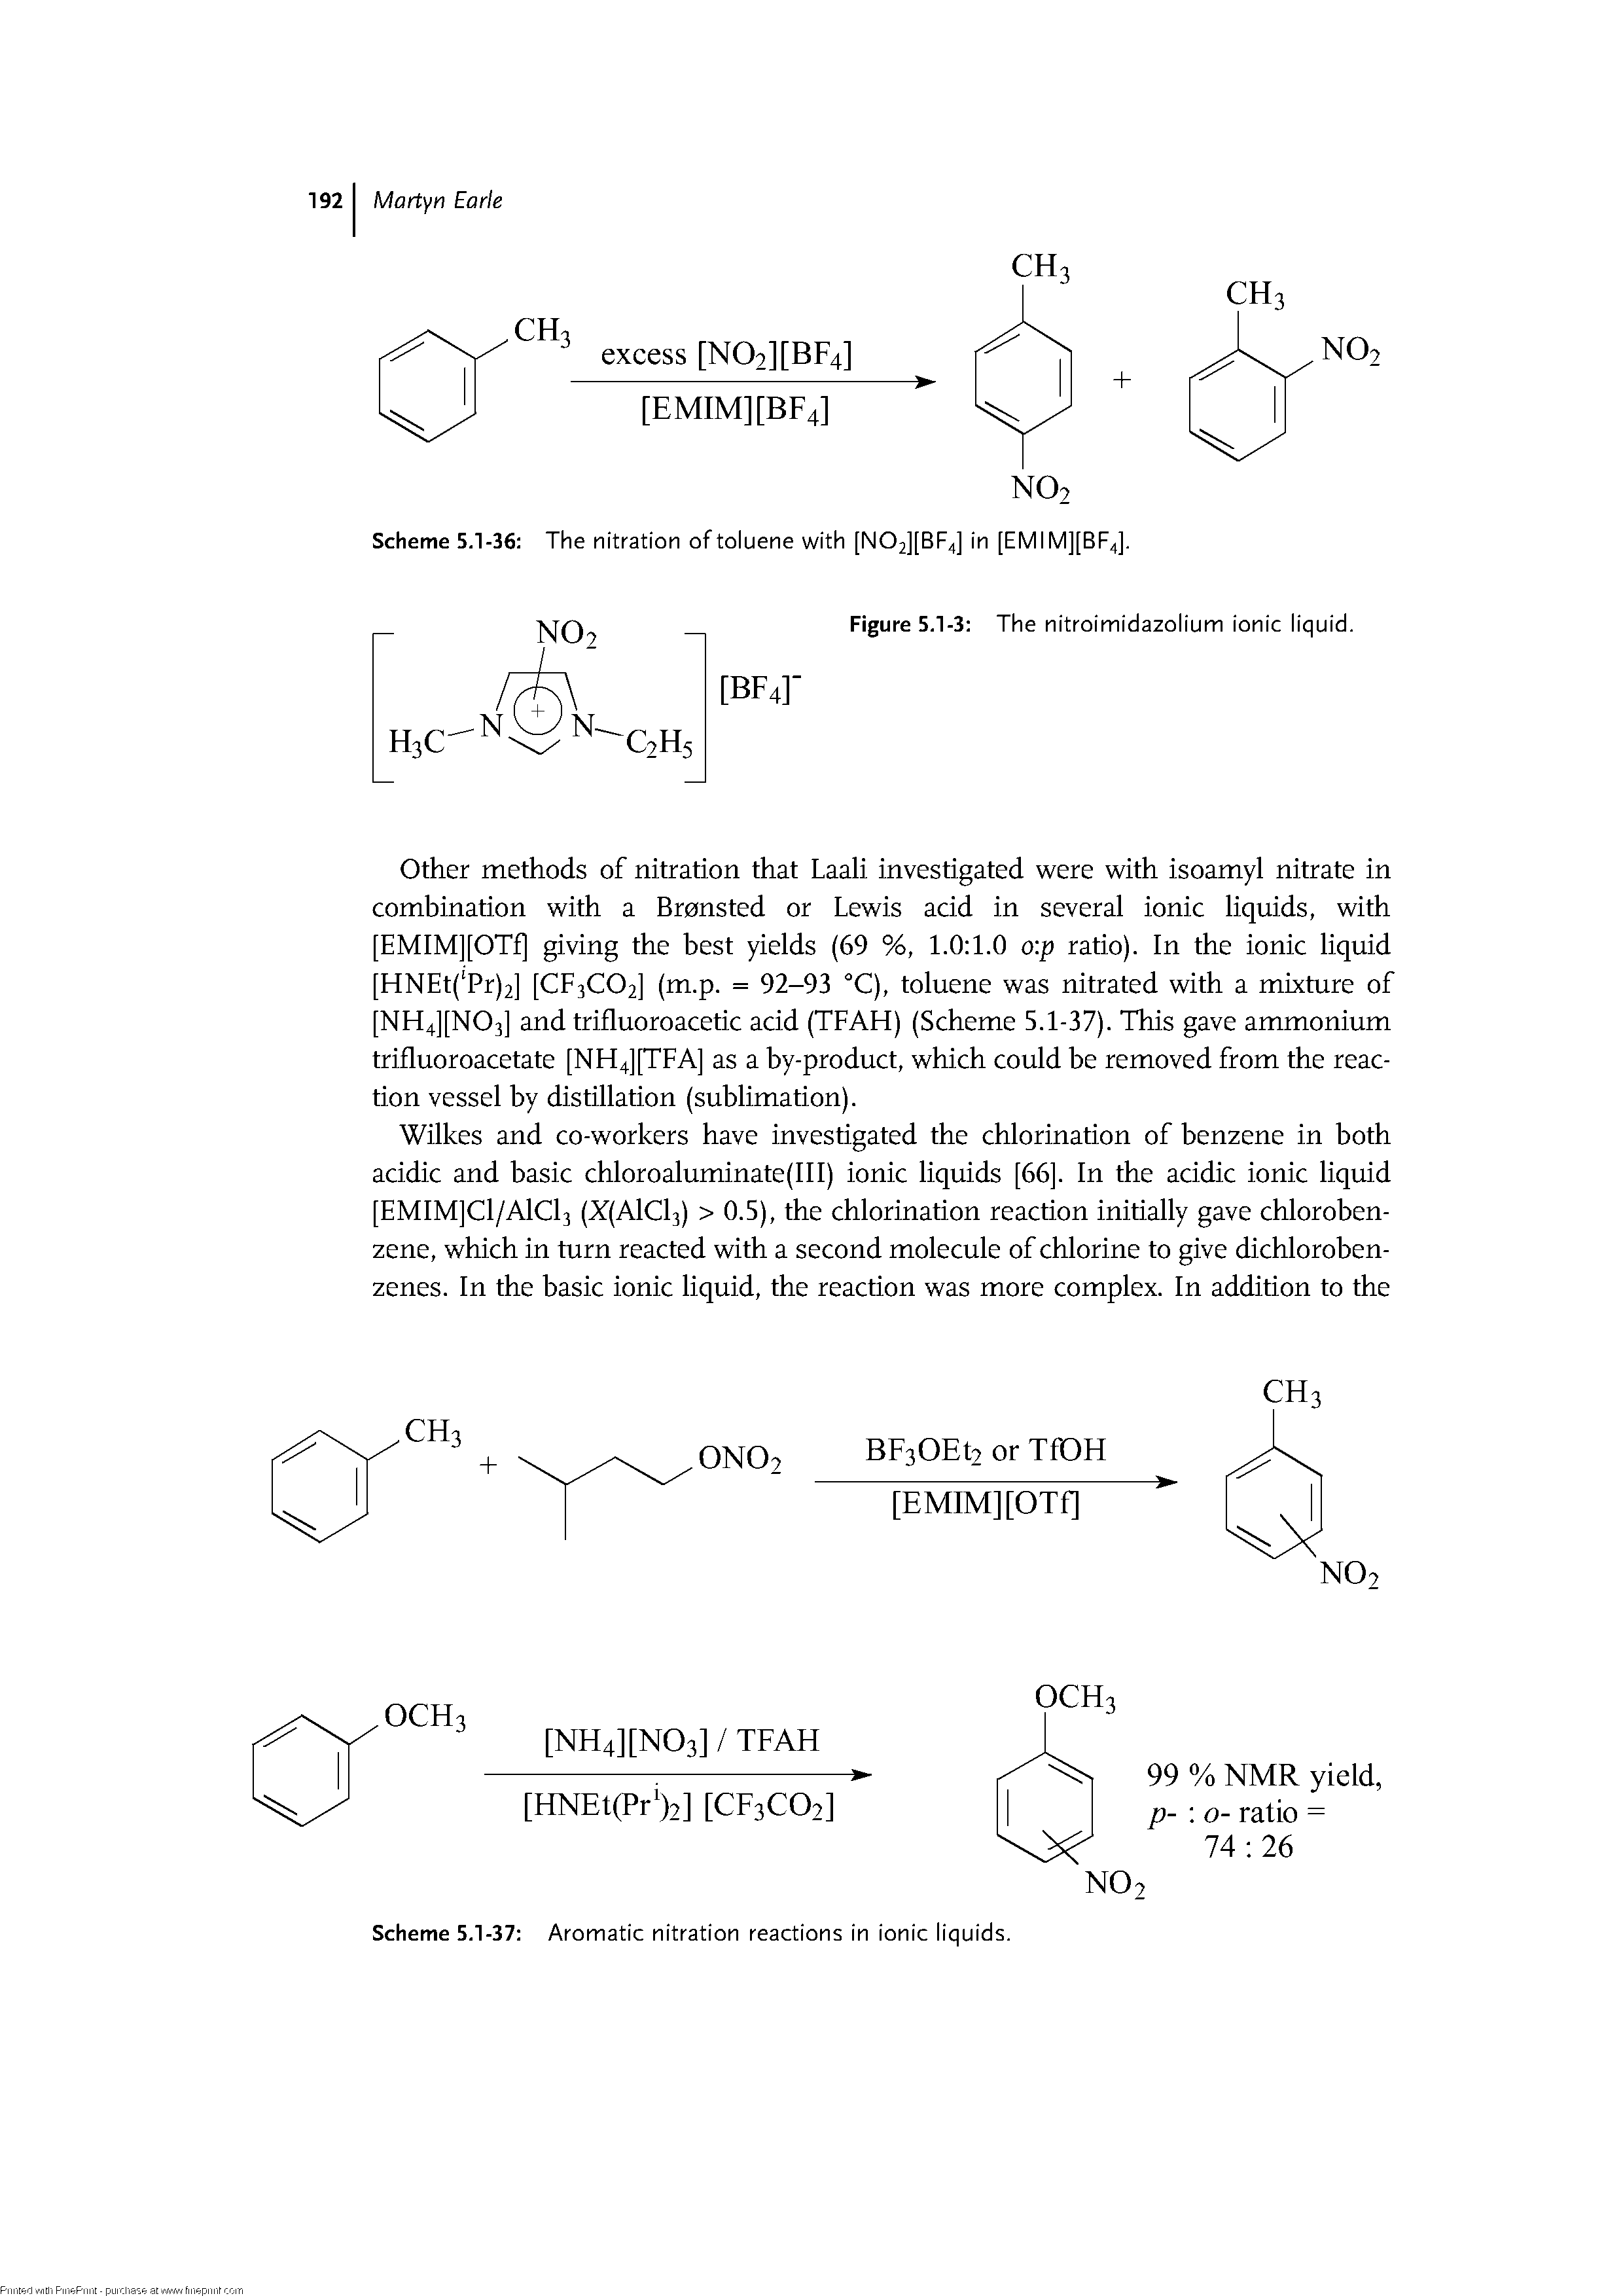 Scheme 5.1-37 Aromatic nitration reactions in ionic liquids.